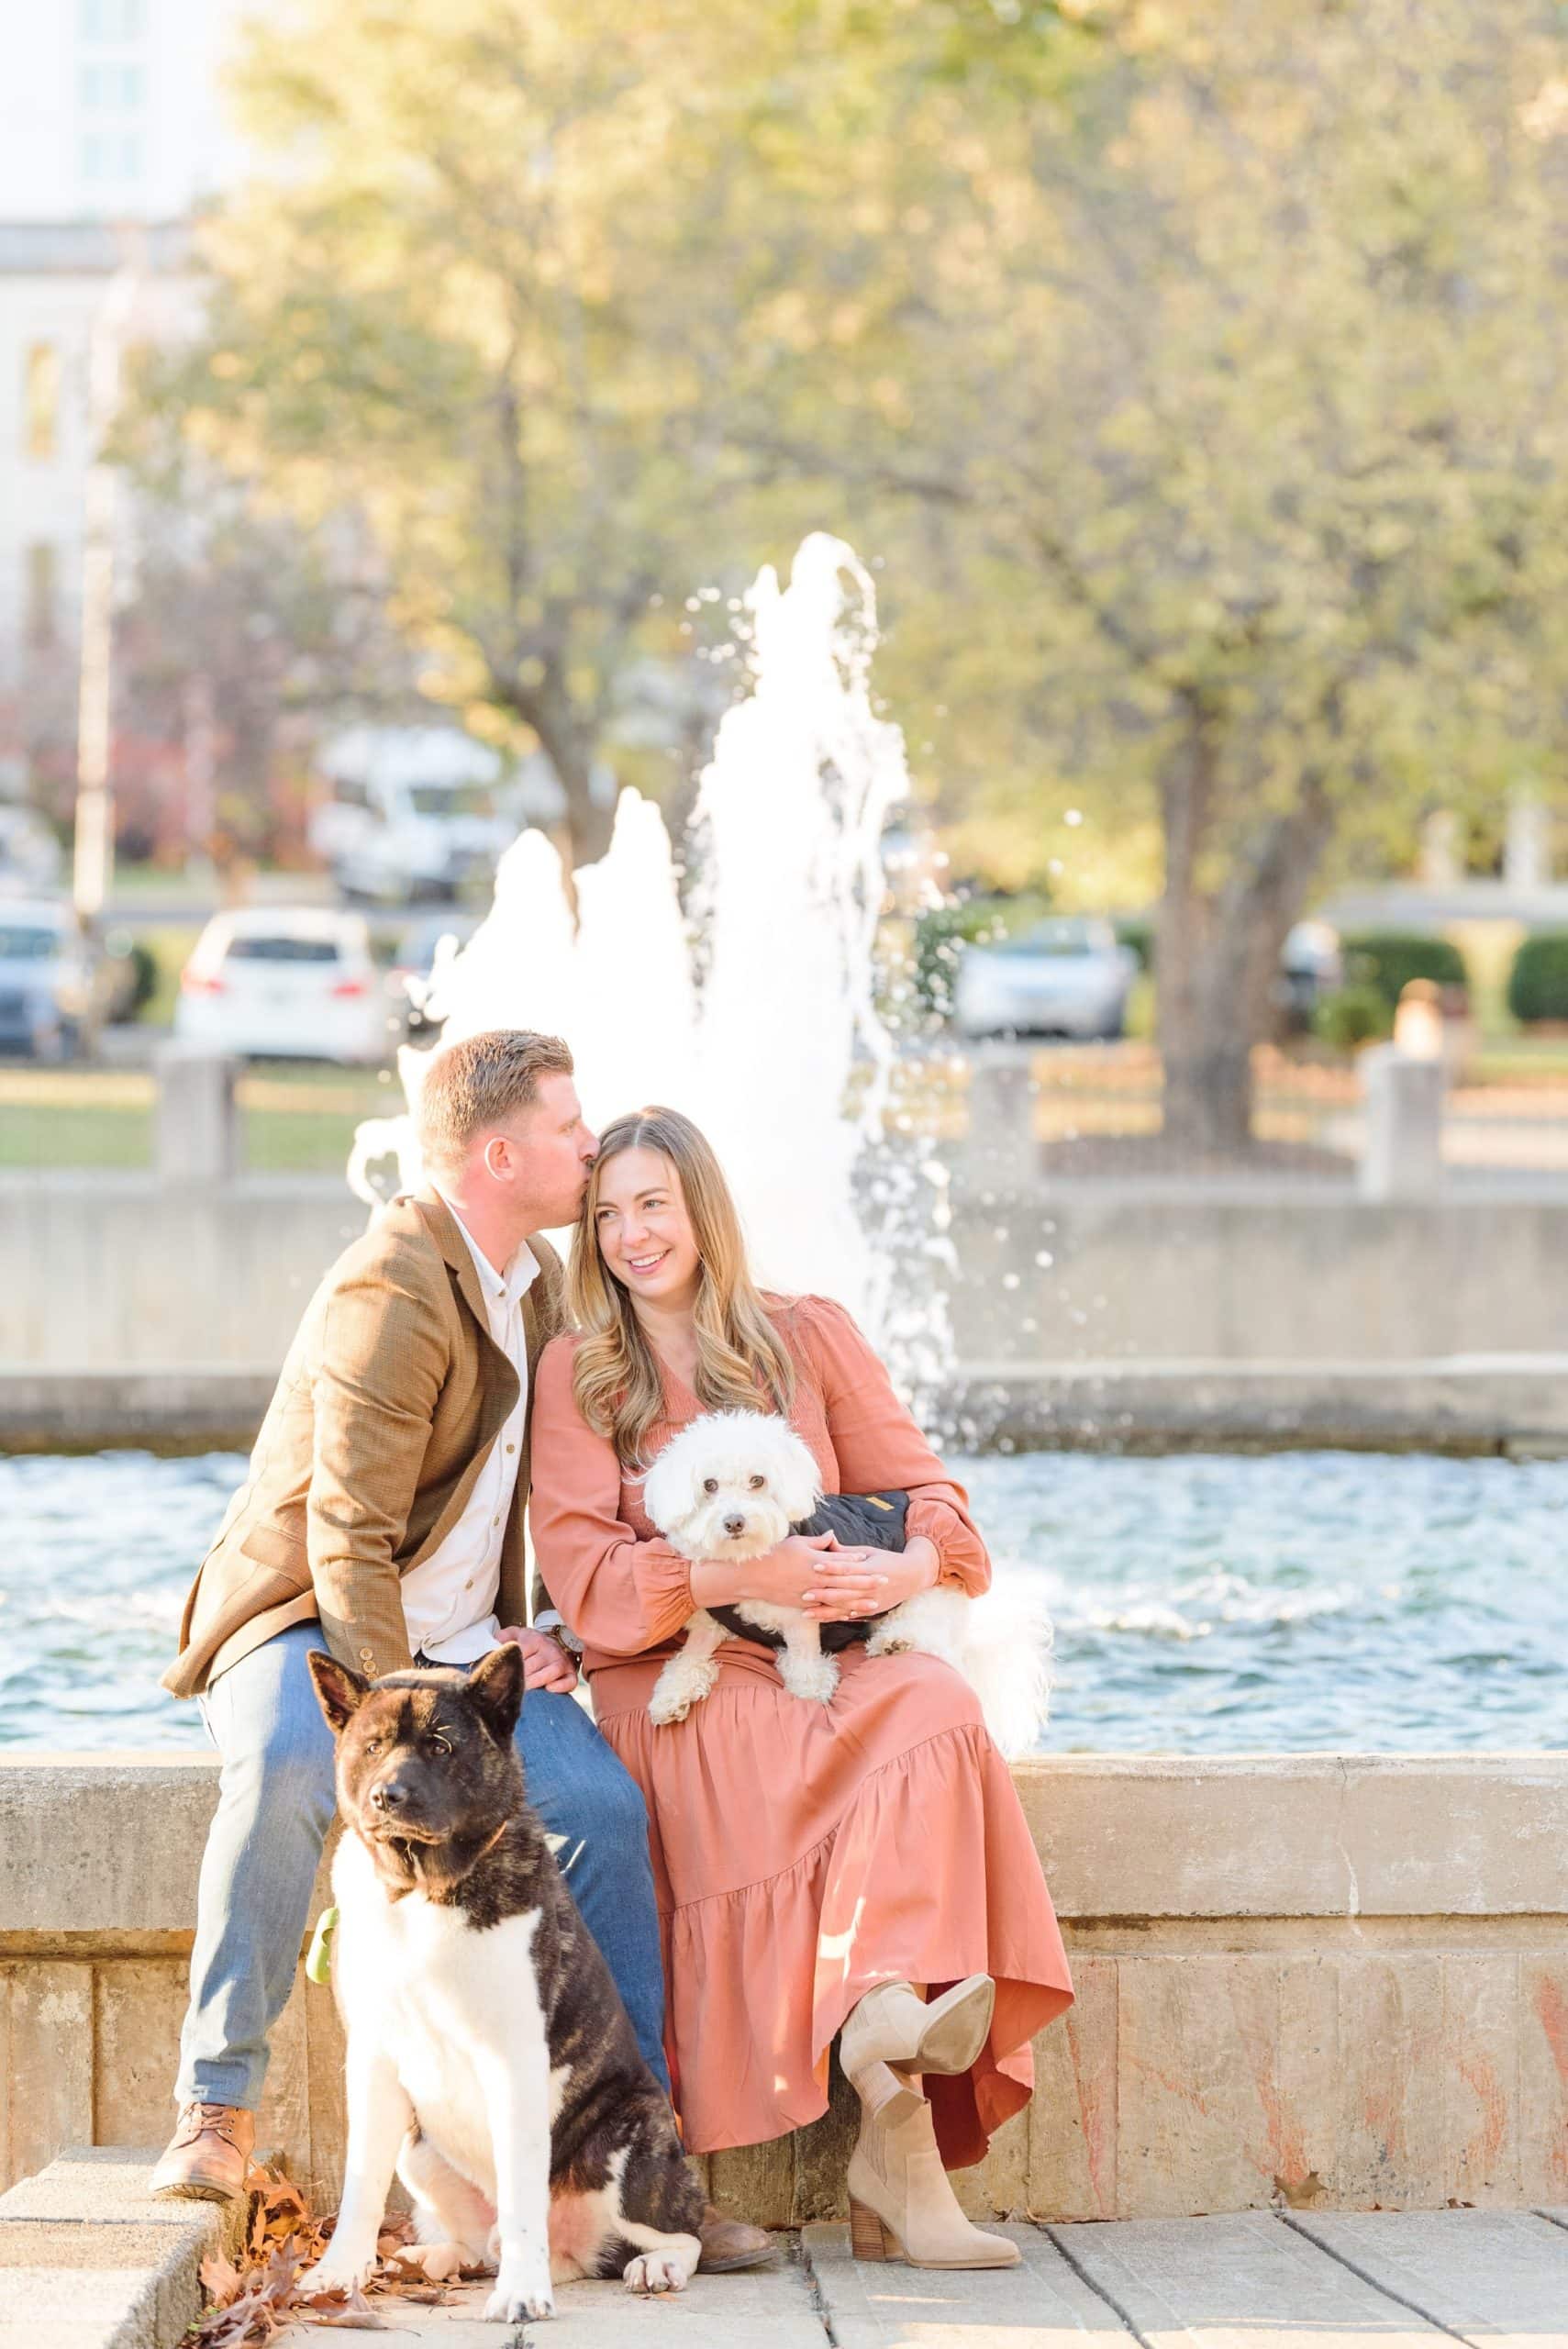 Kati and Curtis sit on the edge of a fountain during their city engagement photos.